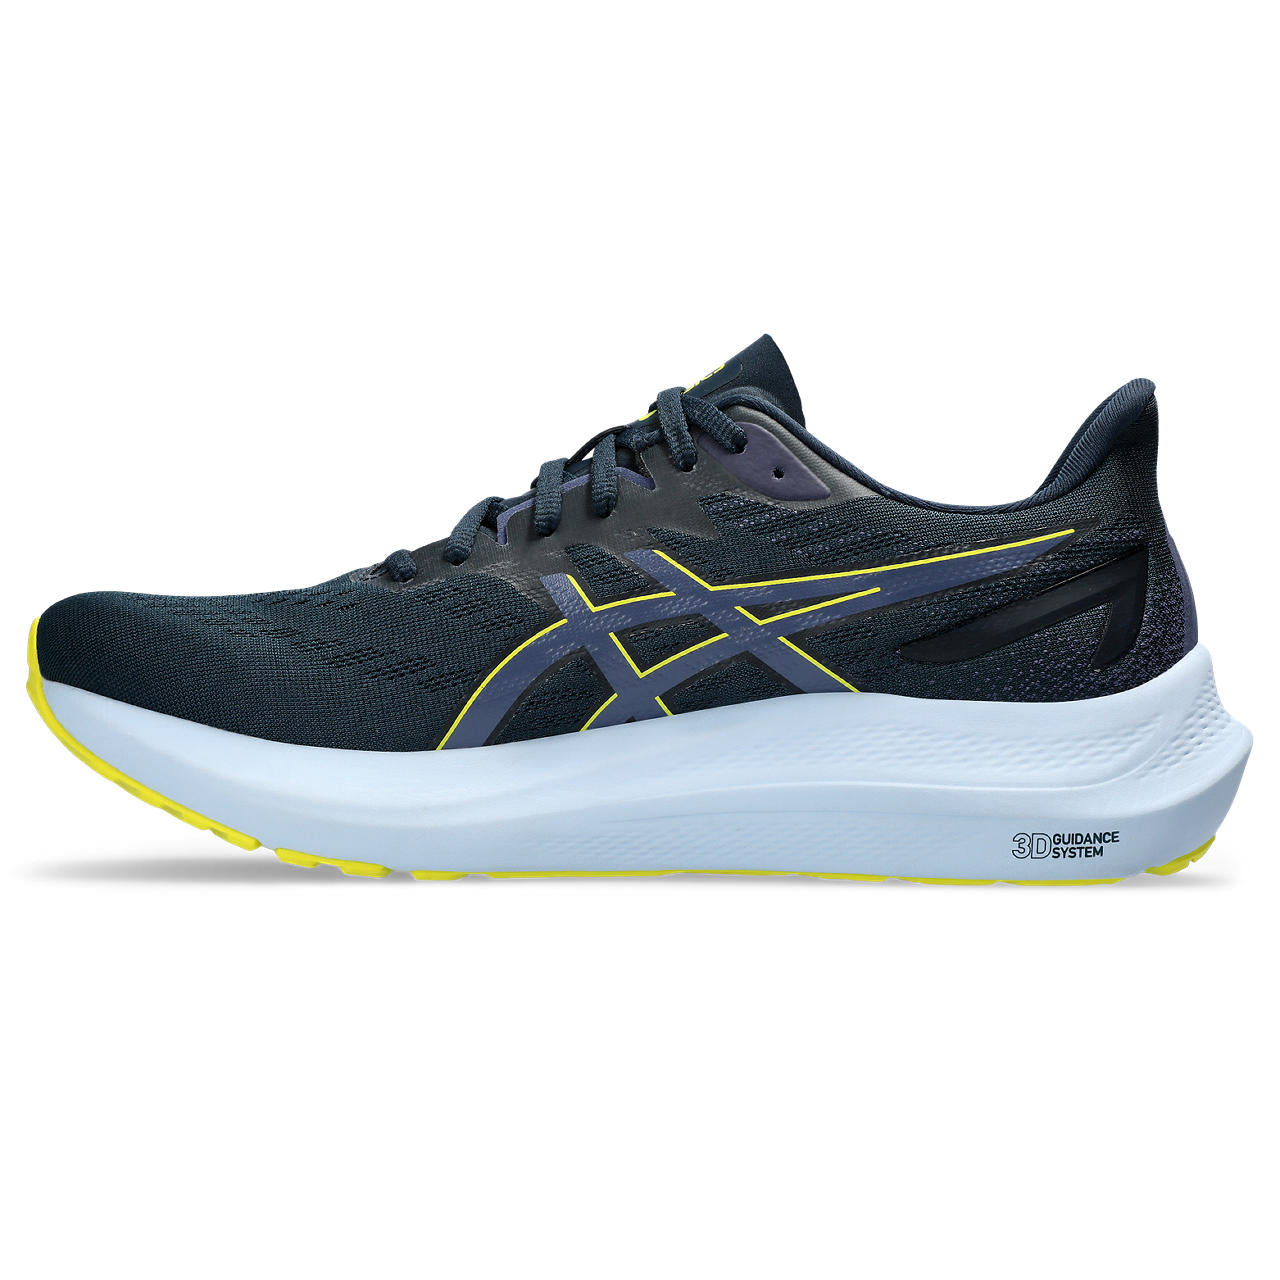 ASICS MEN'S GT-2000 12 - D - 403 FRENCH BLUE/BRIGHT YELLOW 